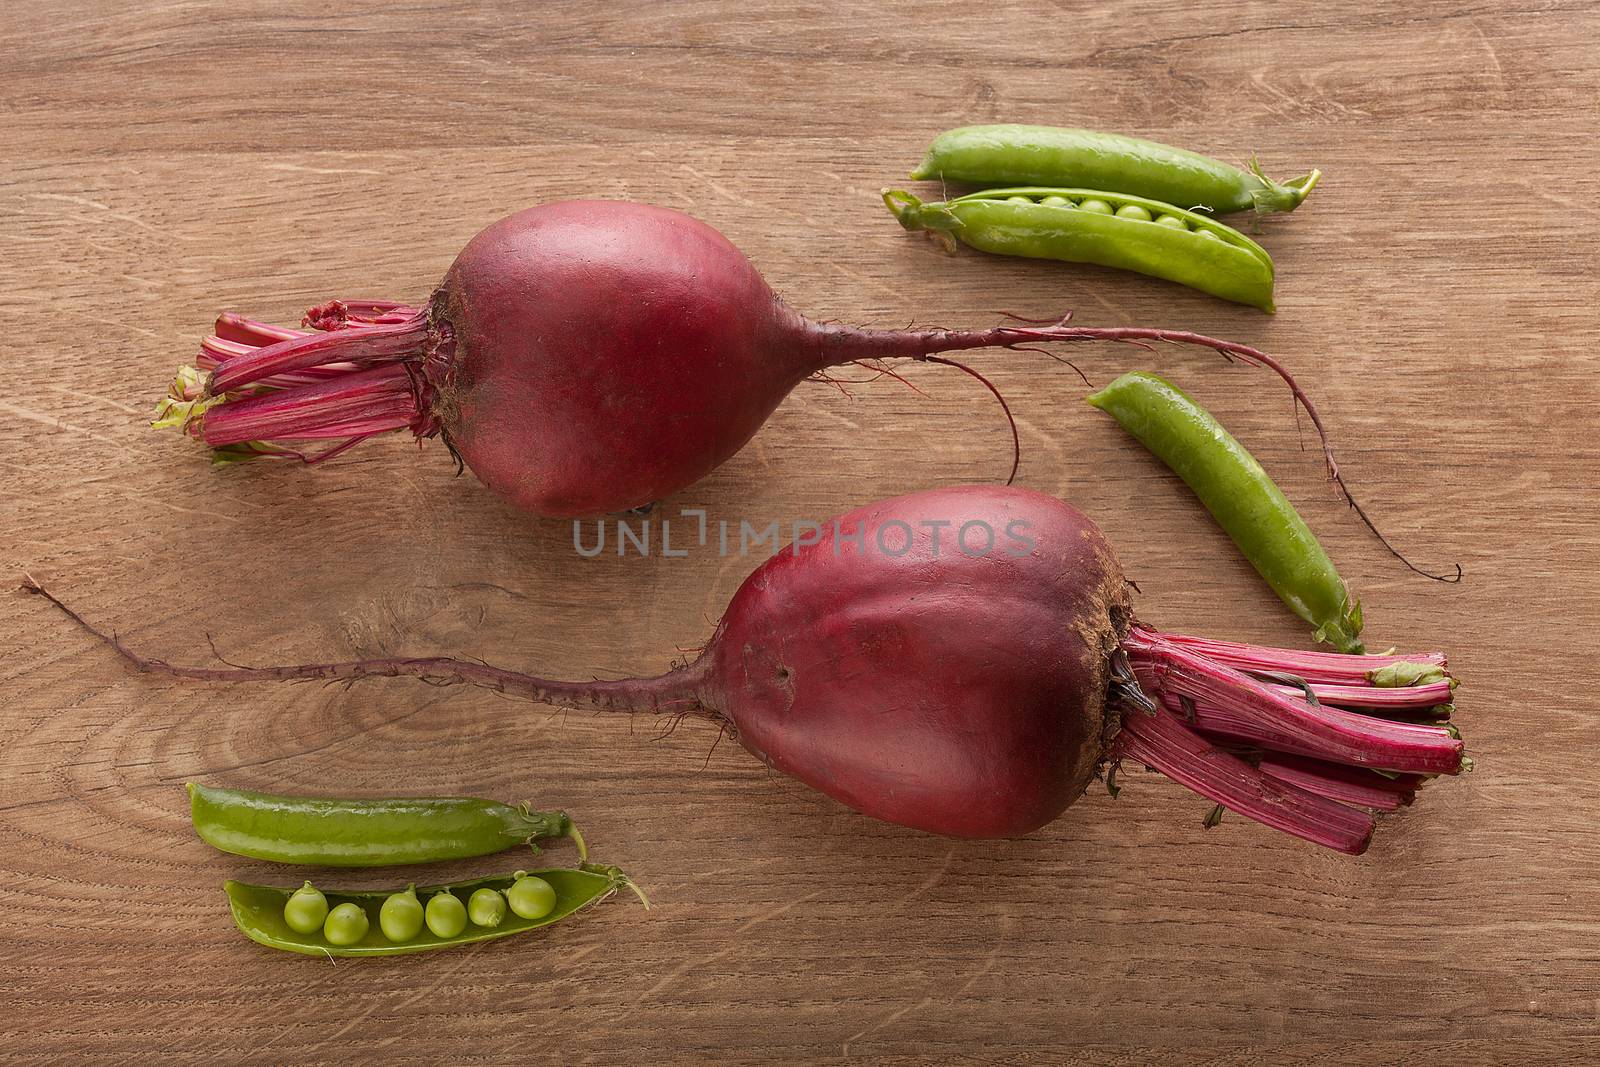 Top view of two red beets and fresh green pea pods on the wooden table